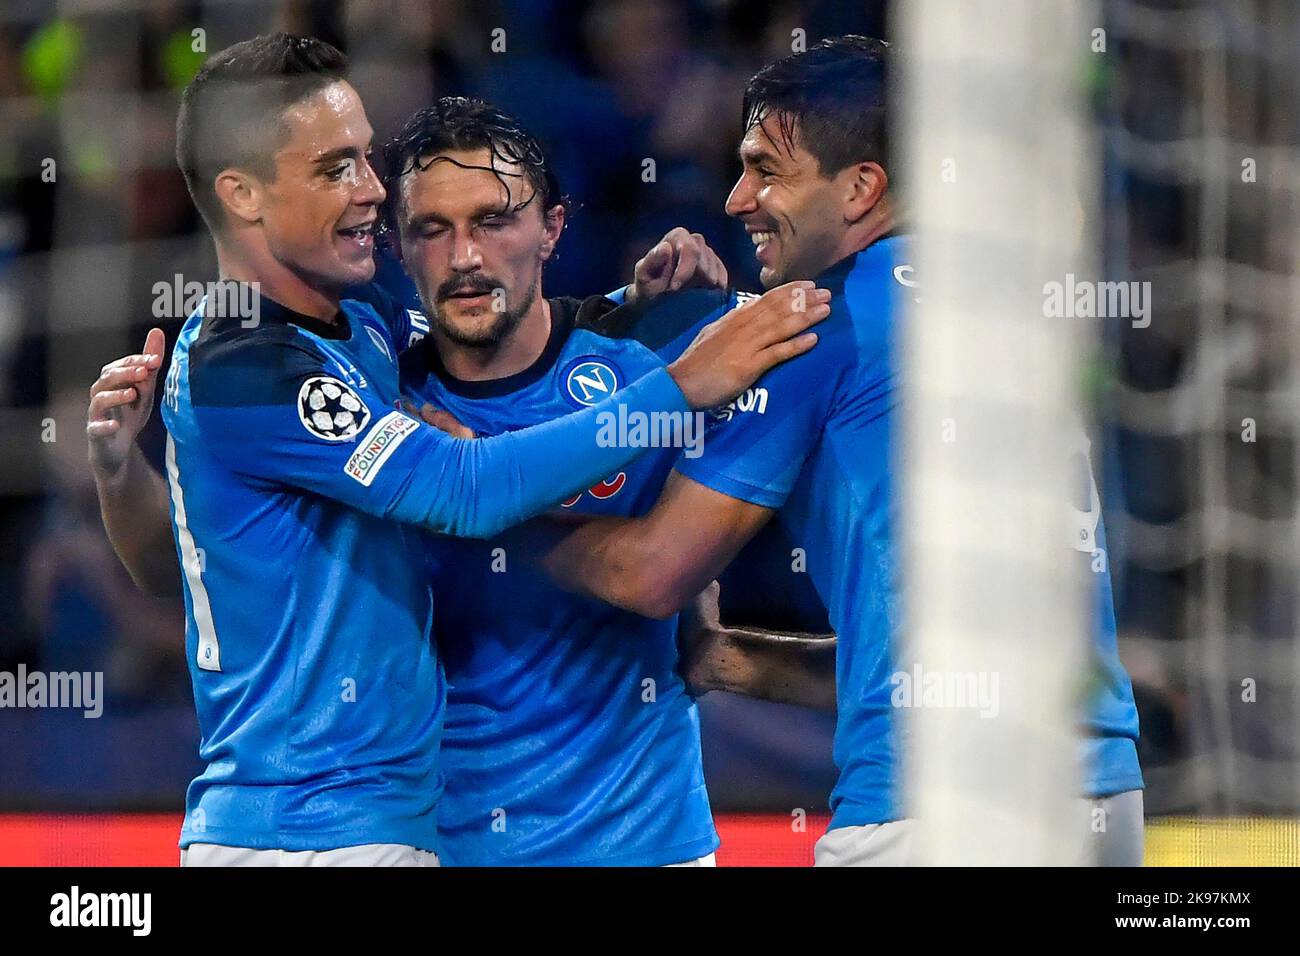 Napoli, Italy. 26th Oct, 2022. Giovanni Simeone of SSC Napoli celebrates with team mates after scoring the goal of 2-0 during the Champions League Group A football match between SSC Napoli and Rangers FC at Diego Armando Maradona stadium in Napoli (Italy), October 26th, 2022. Photo Andrea Staccioli/Insidefoto Credit: Insidefoto di andrea staccioli/Alamy Live News Stock Photo